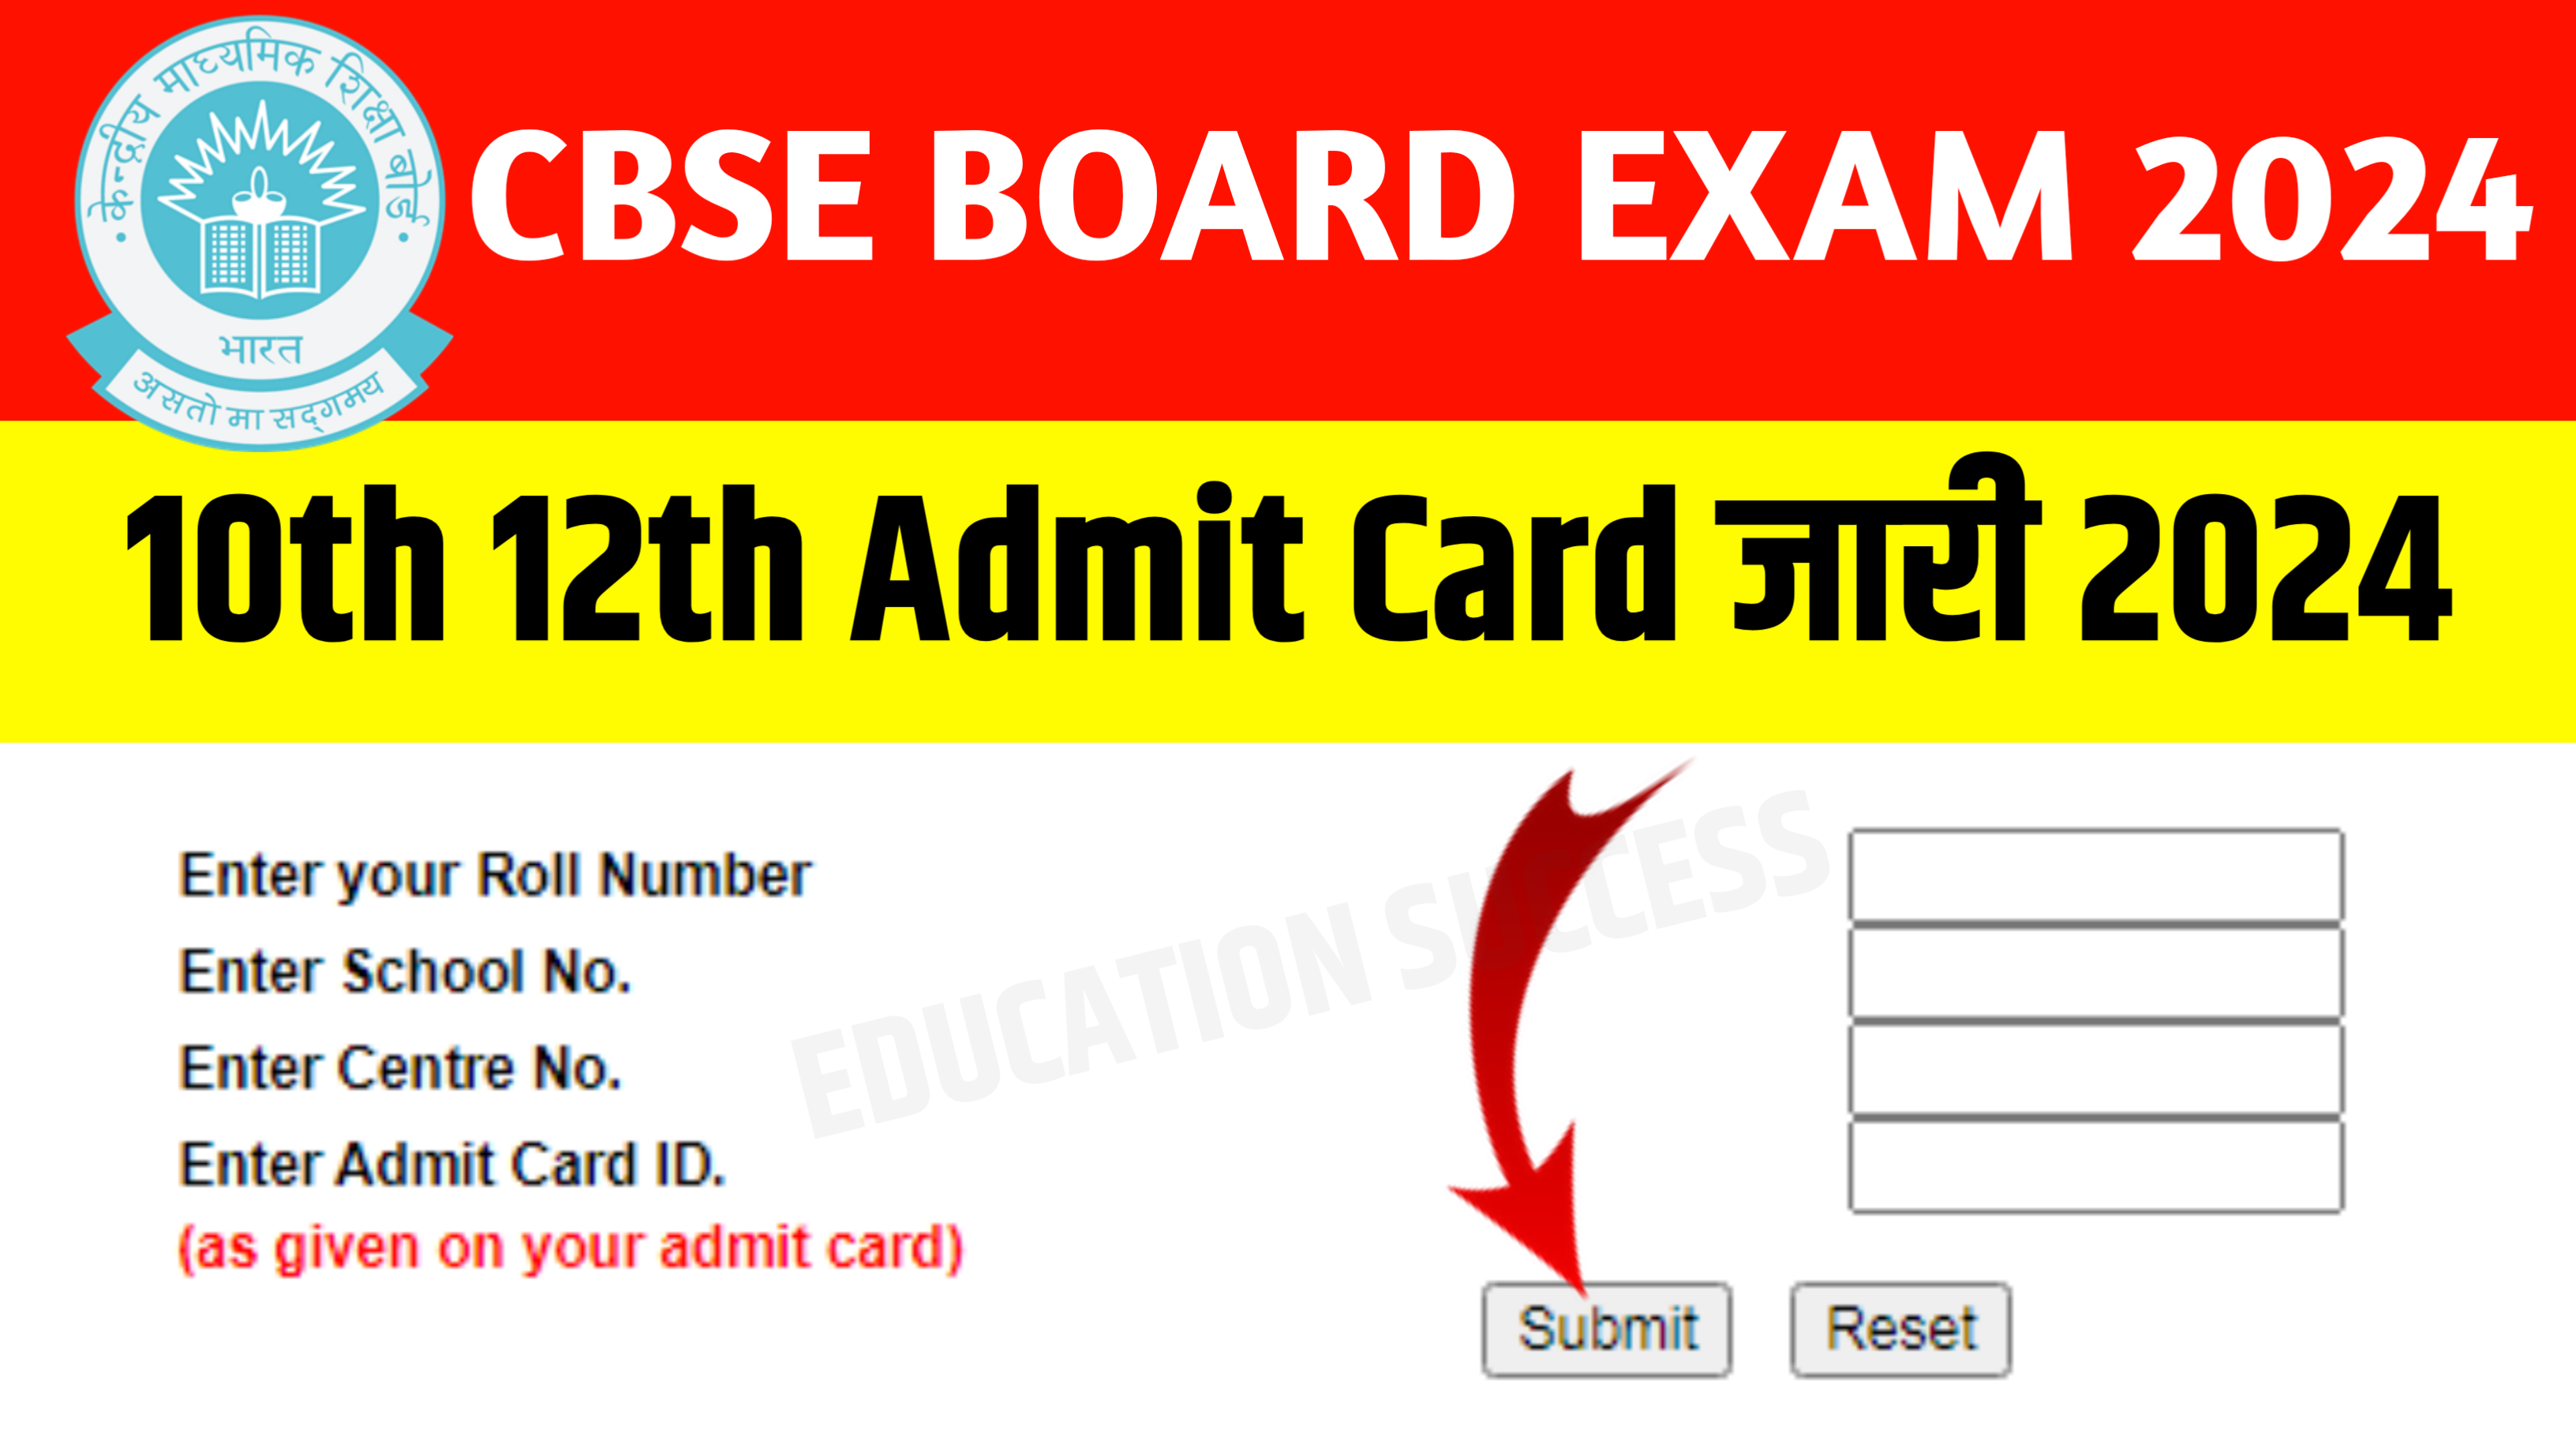 CBSE Board 10th 12th Admit Card Download Now: